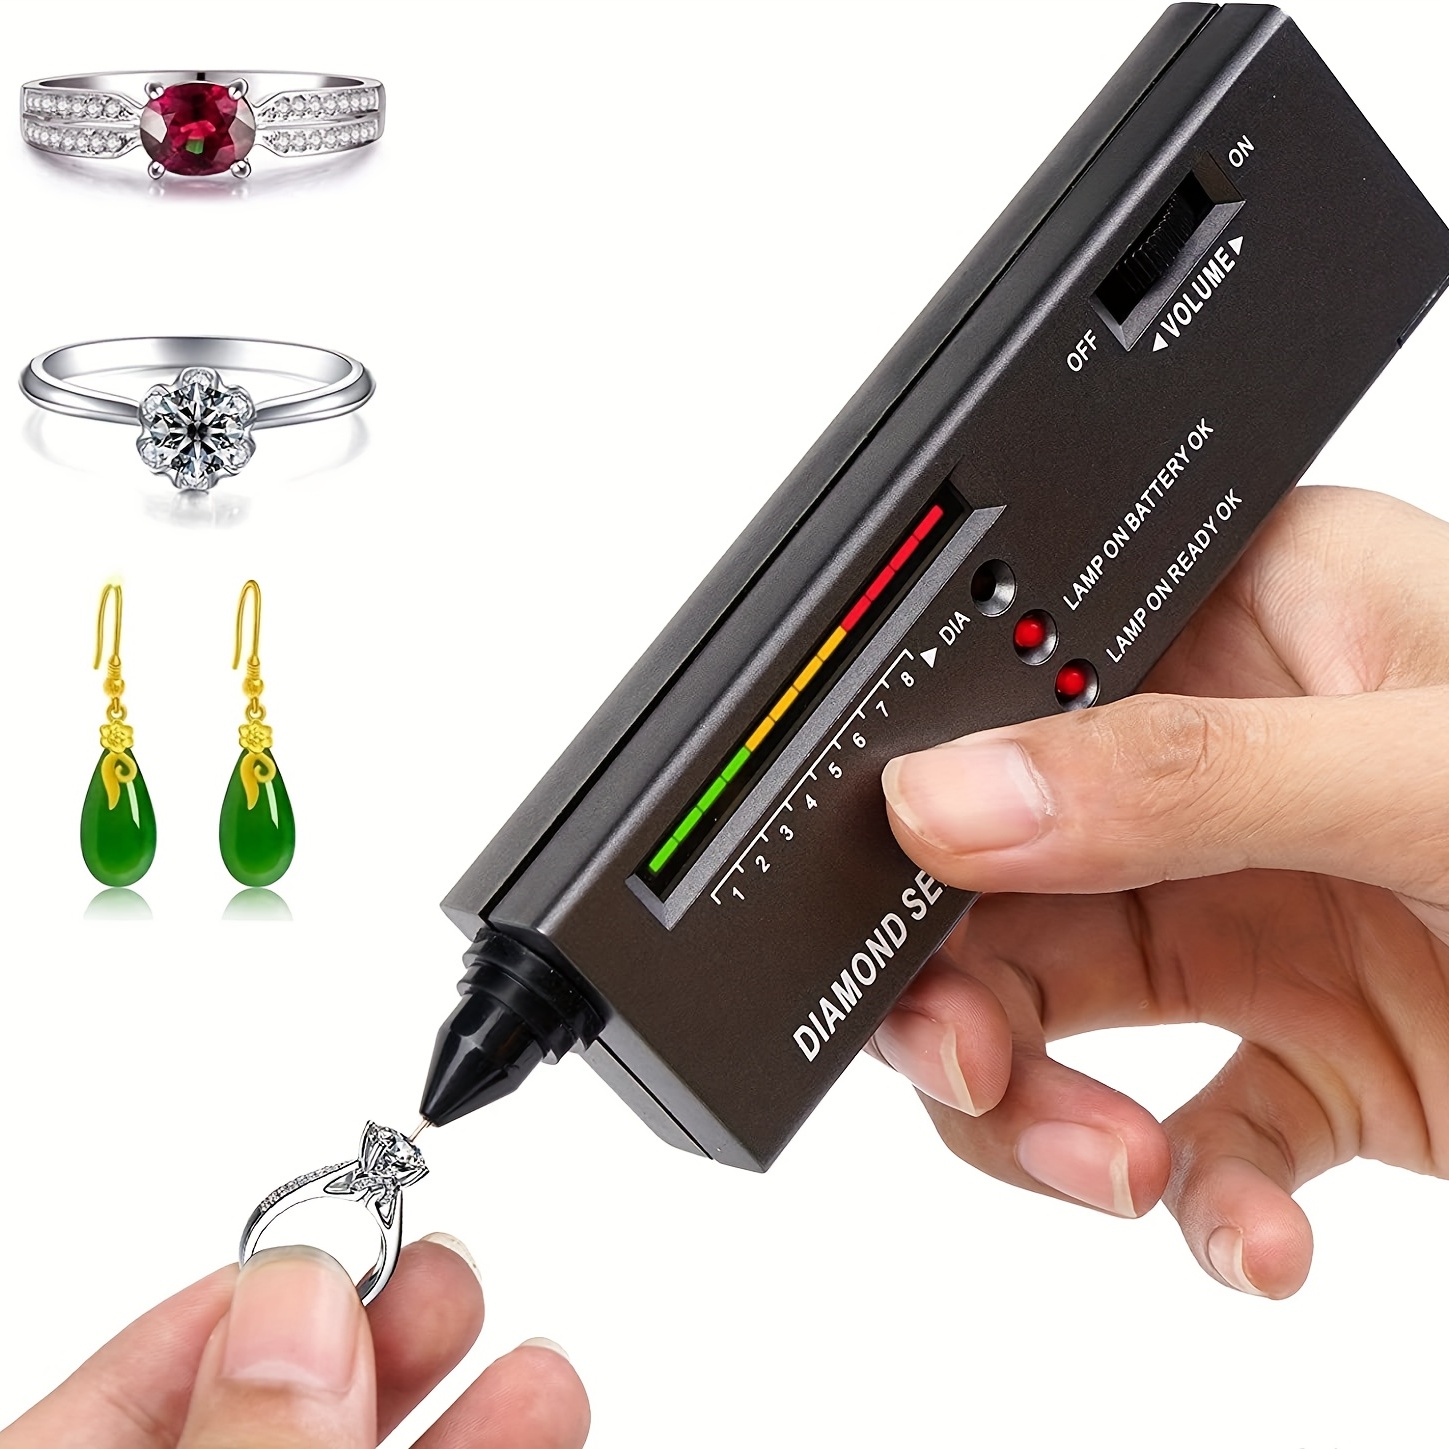 Buy jewelry diamond testers Online in KUWAIT at Low Prices at